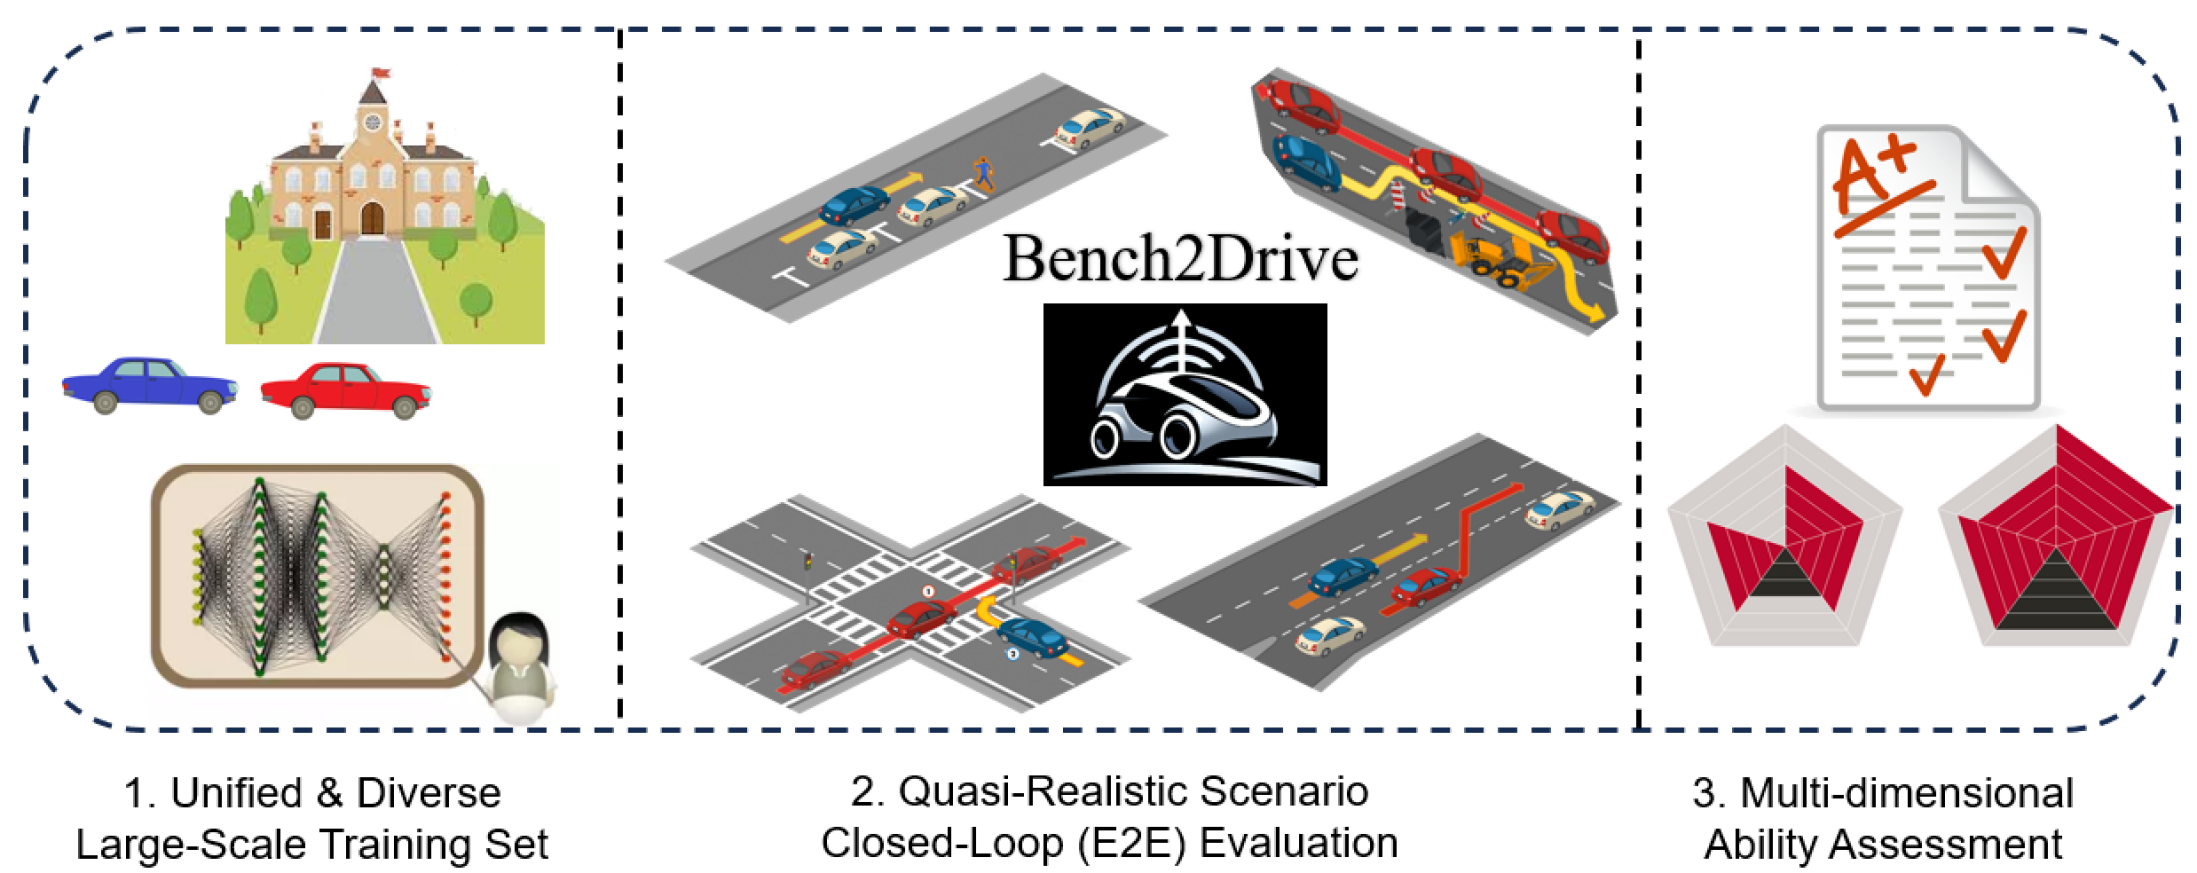 Bench2Drive: Towards Multi-Ability Benchmarking of Closed-Loop End-To-End Autonomous Driving